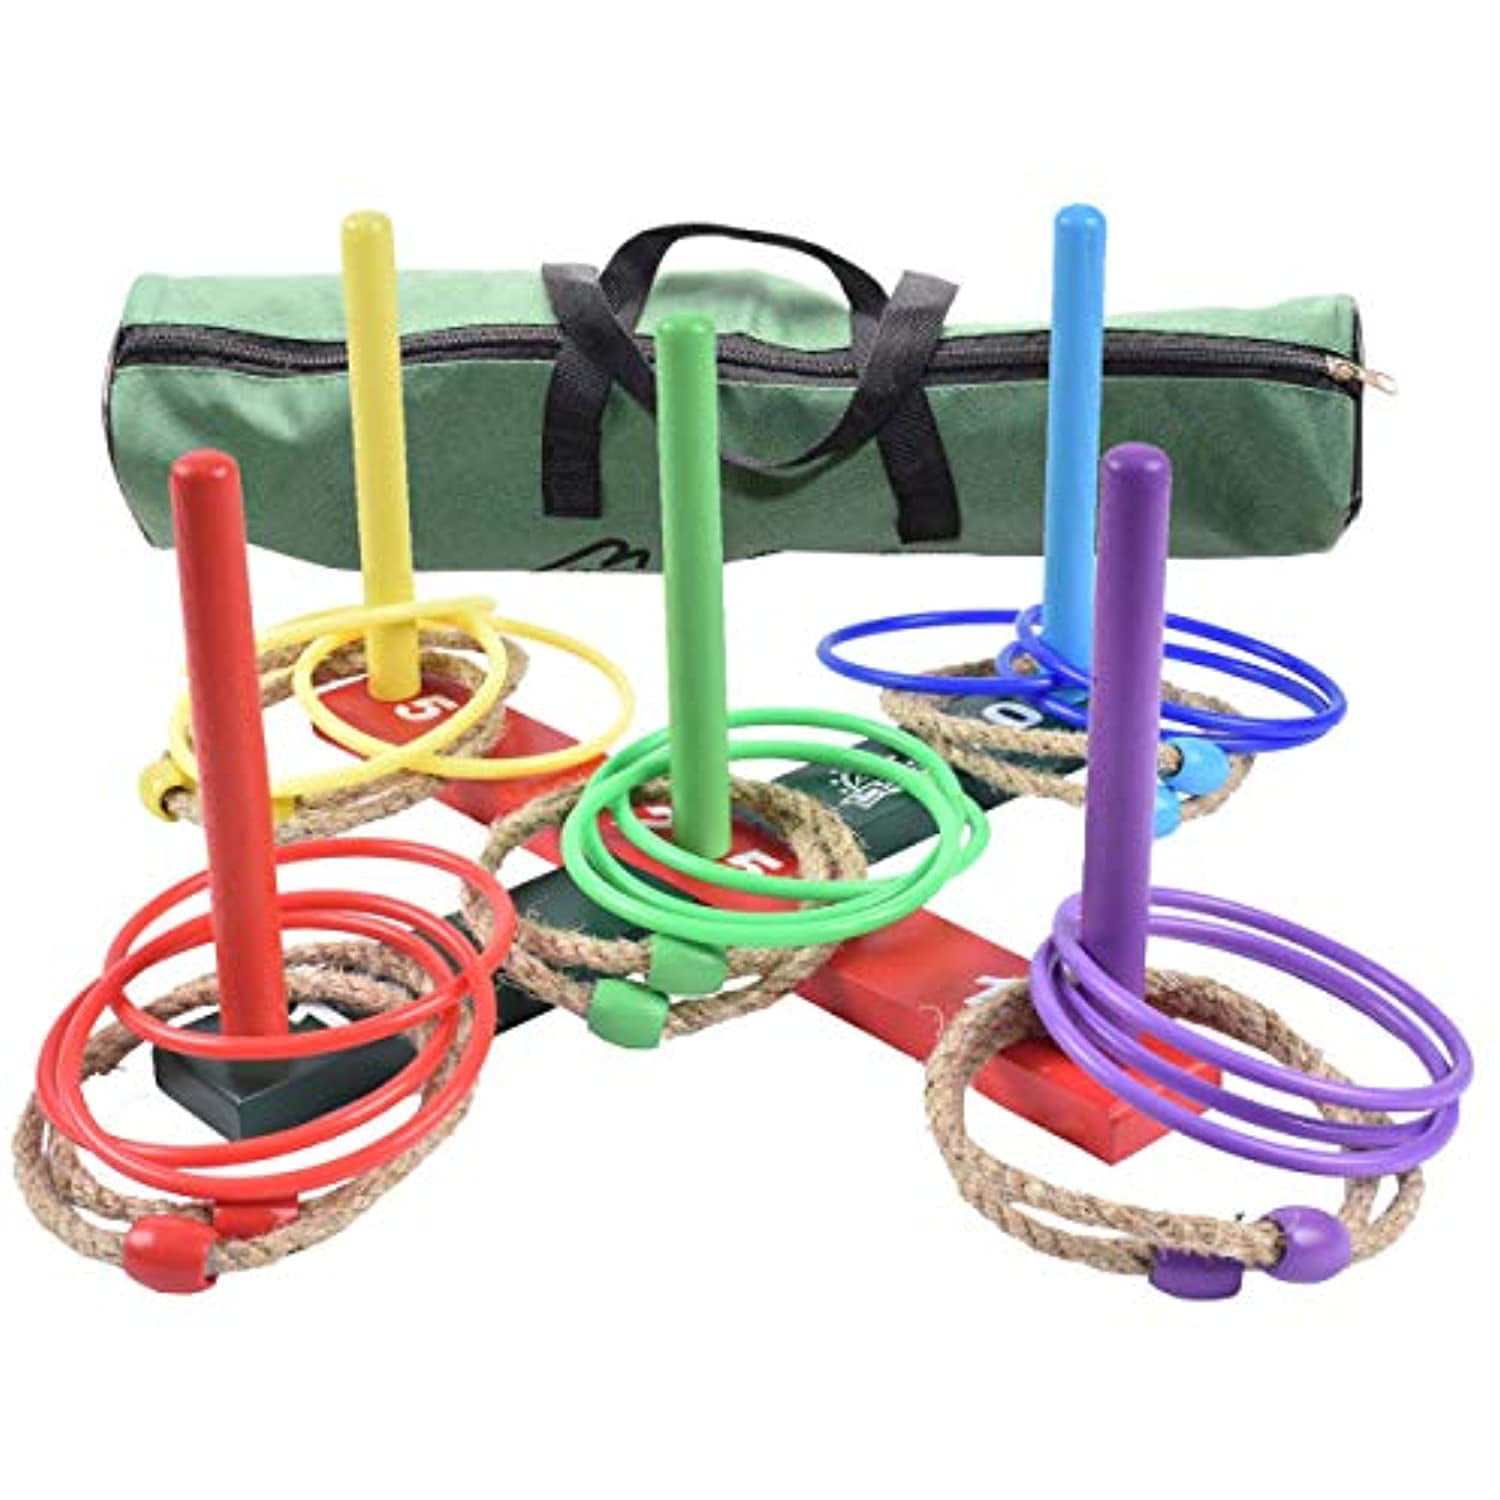 Durable Wooden Hook Toys Ring Toss Game Set with Carrying Bag 15 Ropes & Plastic Rings Lawn Fun for Kids 